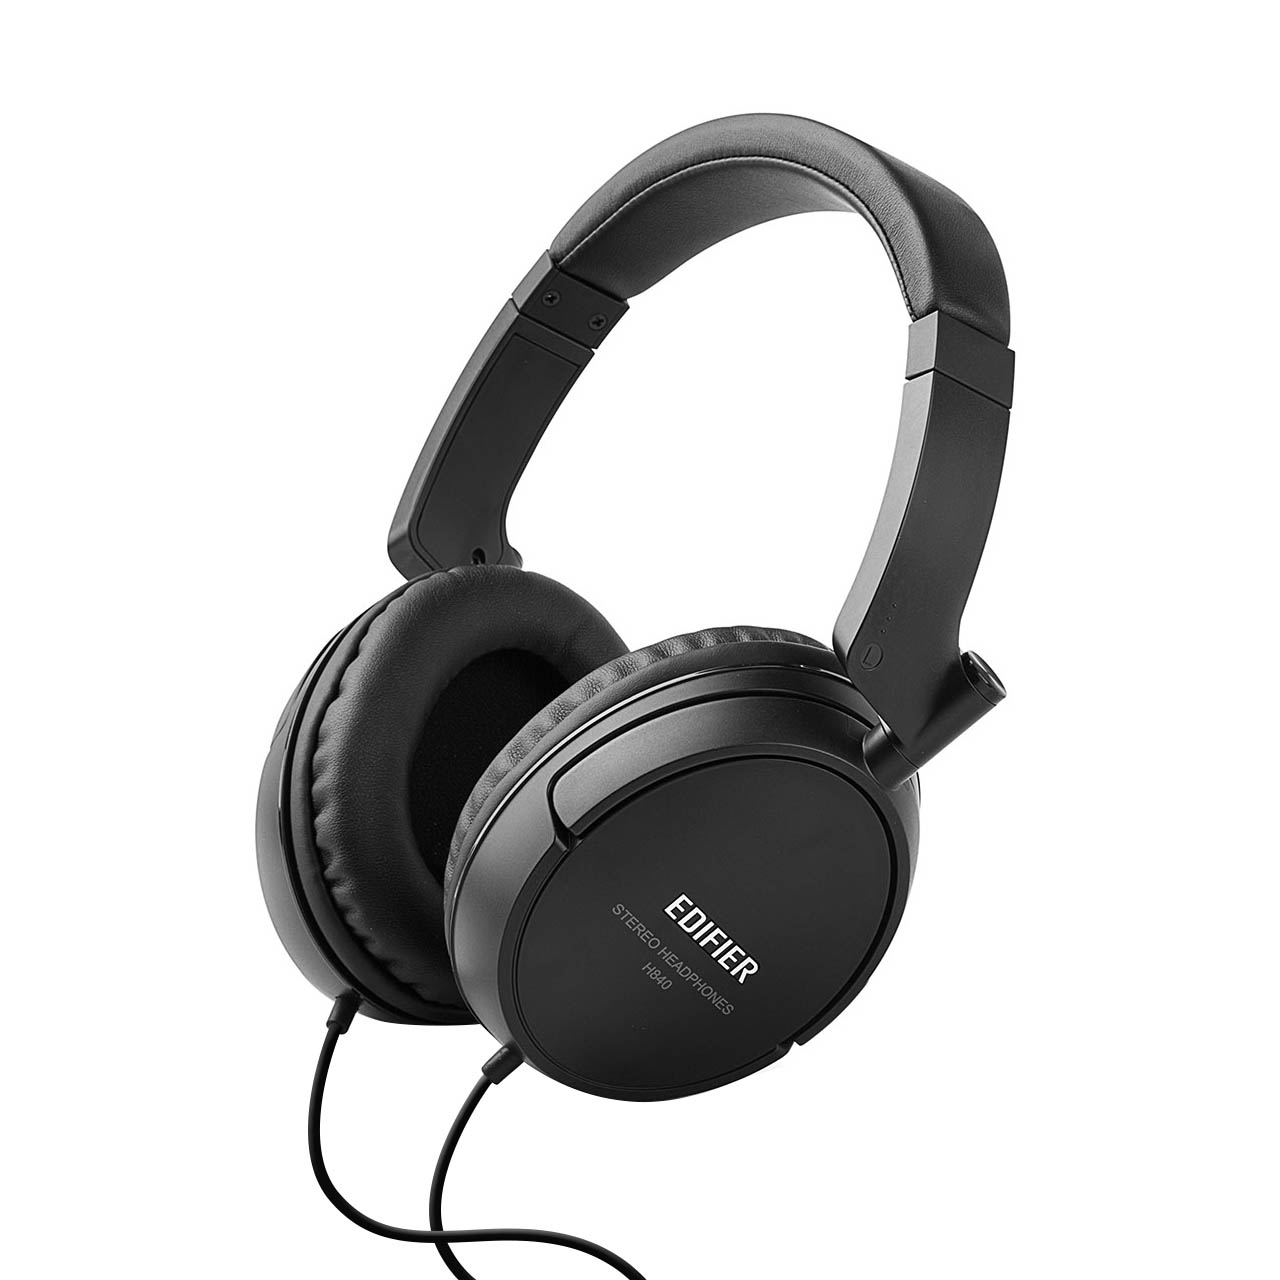 Edifier H840 Audiophile Over-the-ear Noise-Isolating Headphones - Black - image 1 of 7